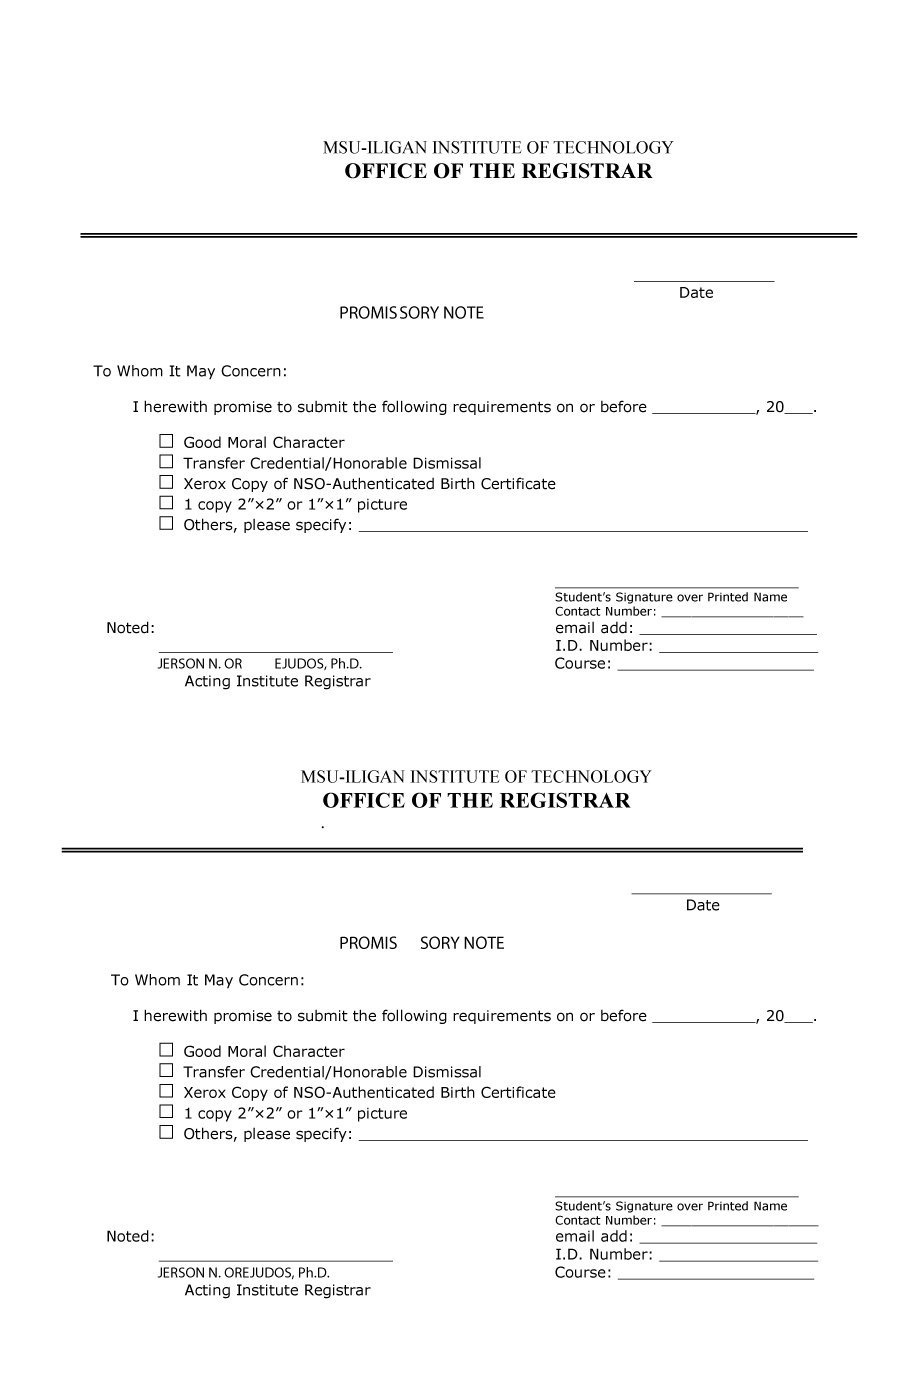 45 Free Promissory Note Templates &amp;amp; Forms [Word &amp;amp; Pdf] ᐅ Template Lab - Free Printable Promissory Note For Personal Loan